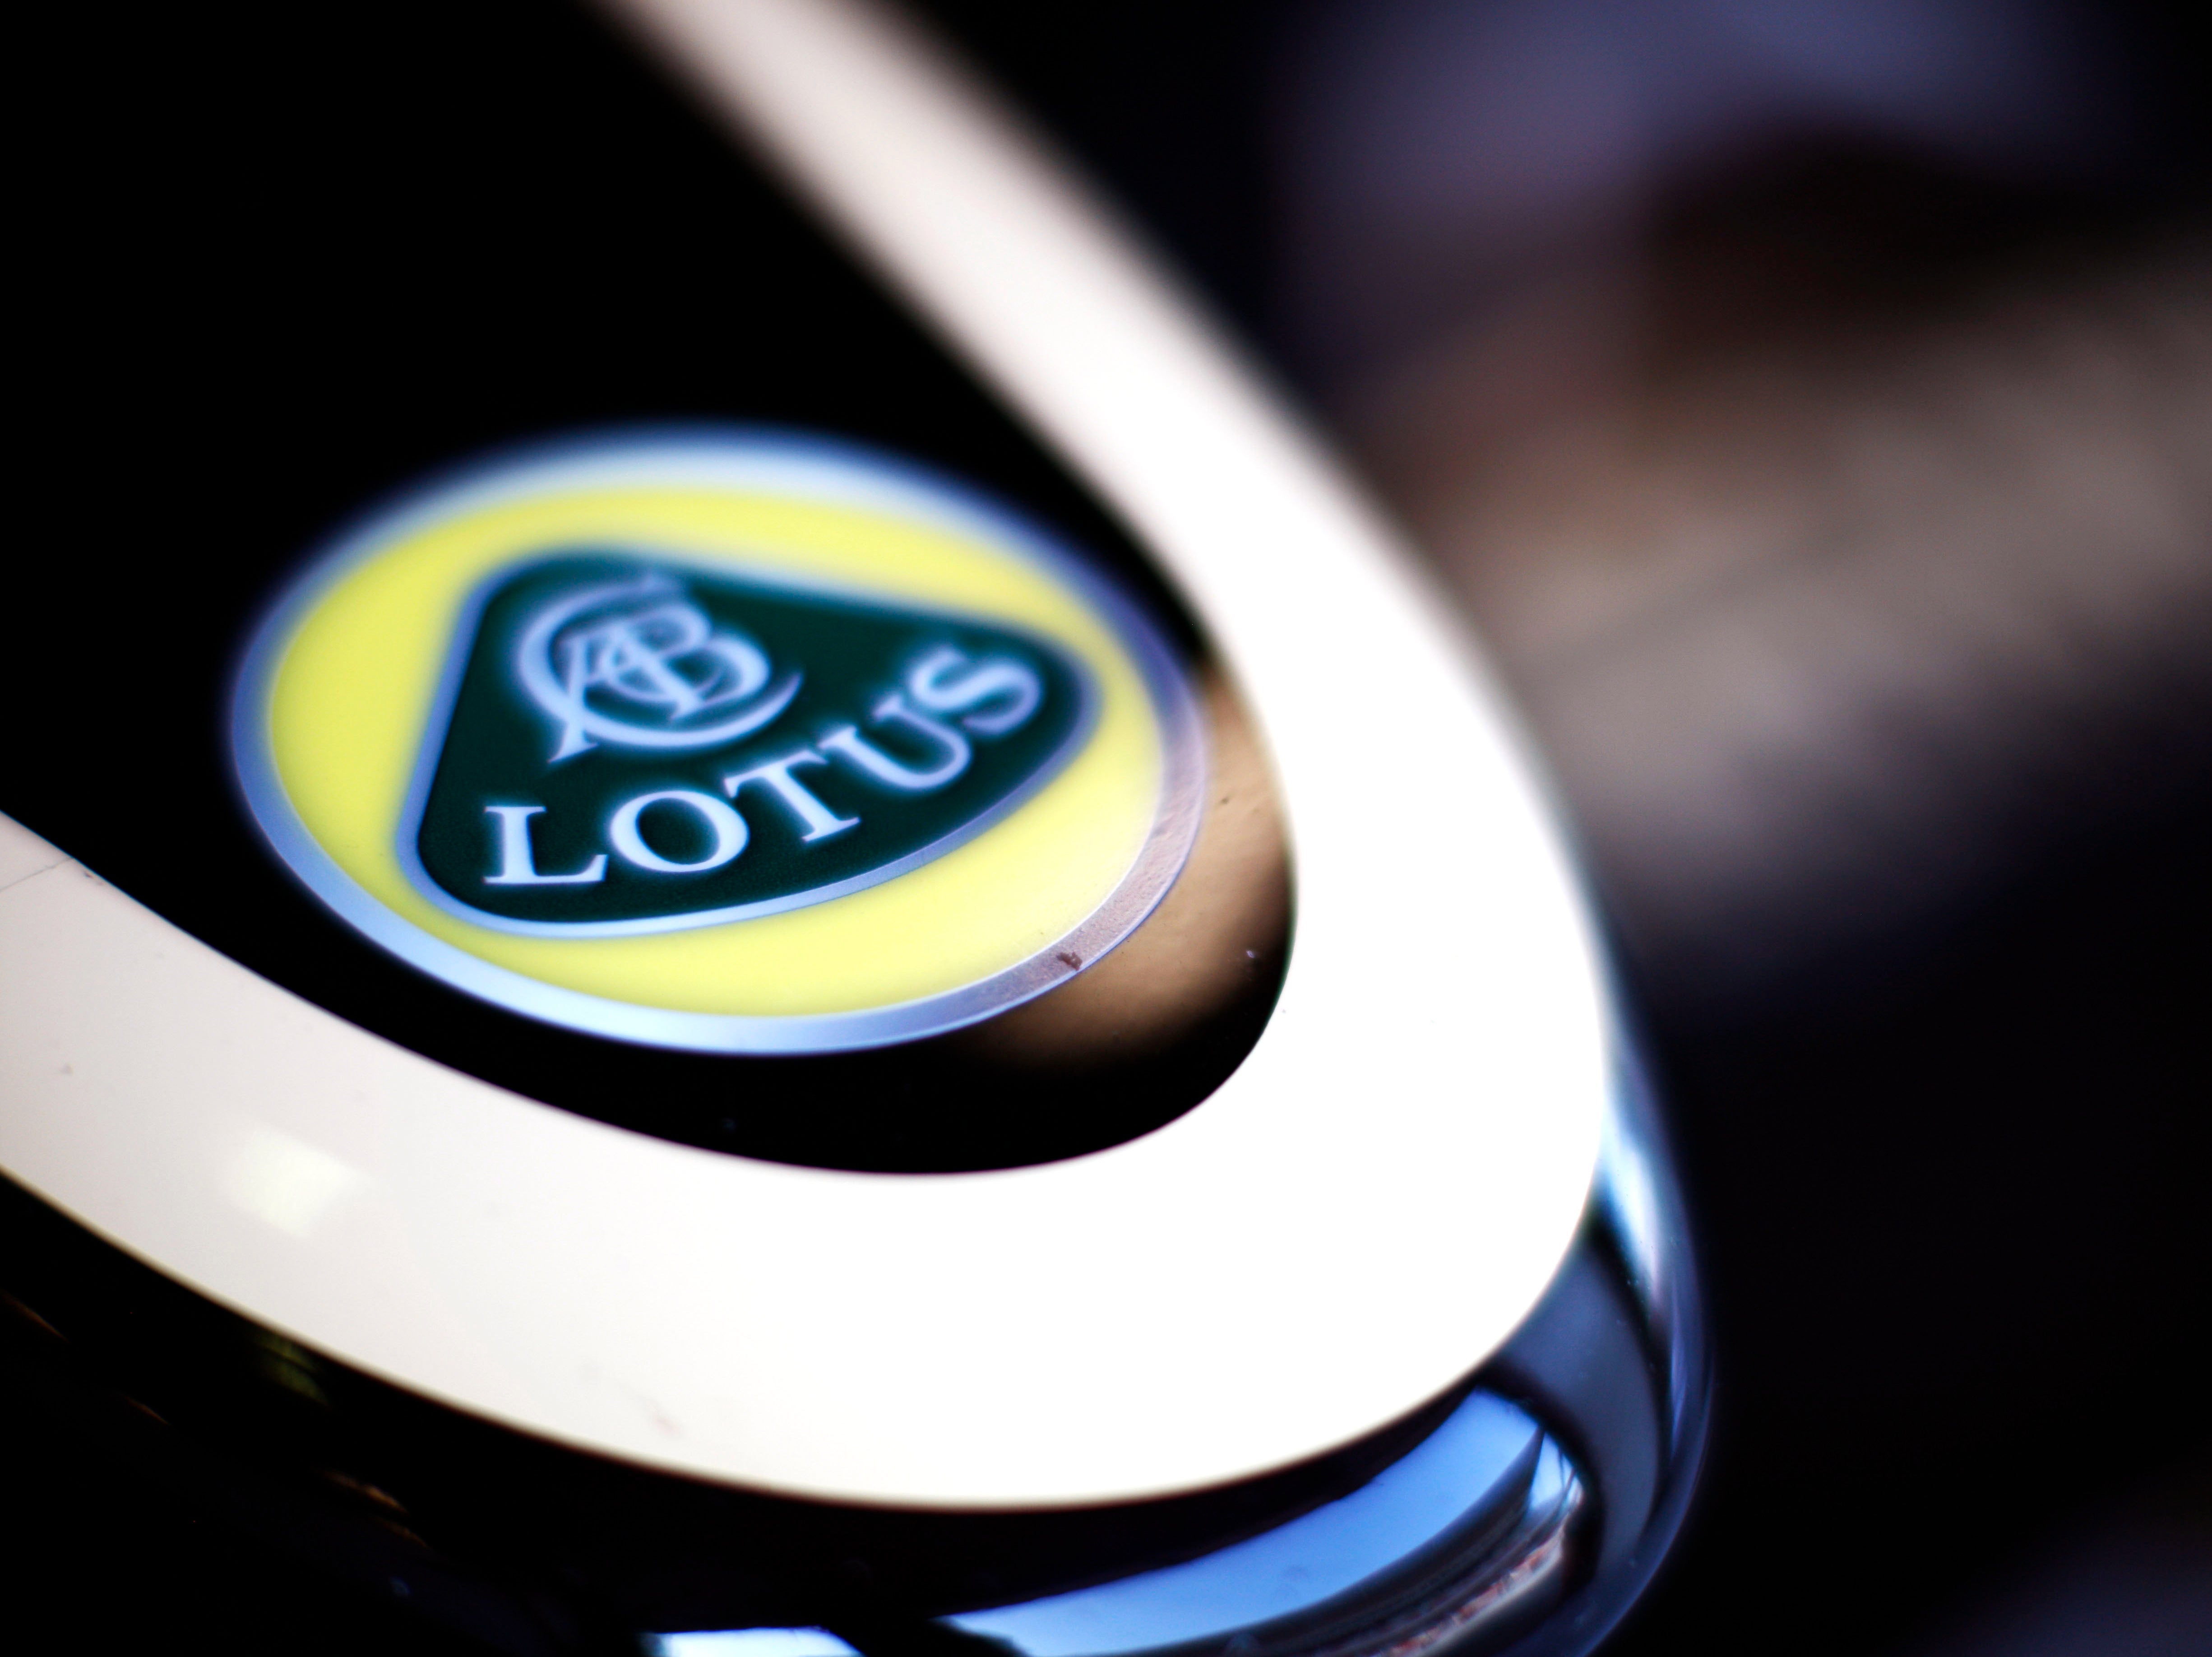 Lotus has just signed an agreement with NIO Inc, the Chinese electric vehicle manufacturer